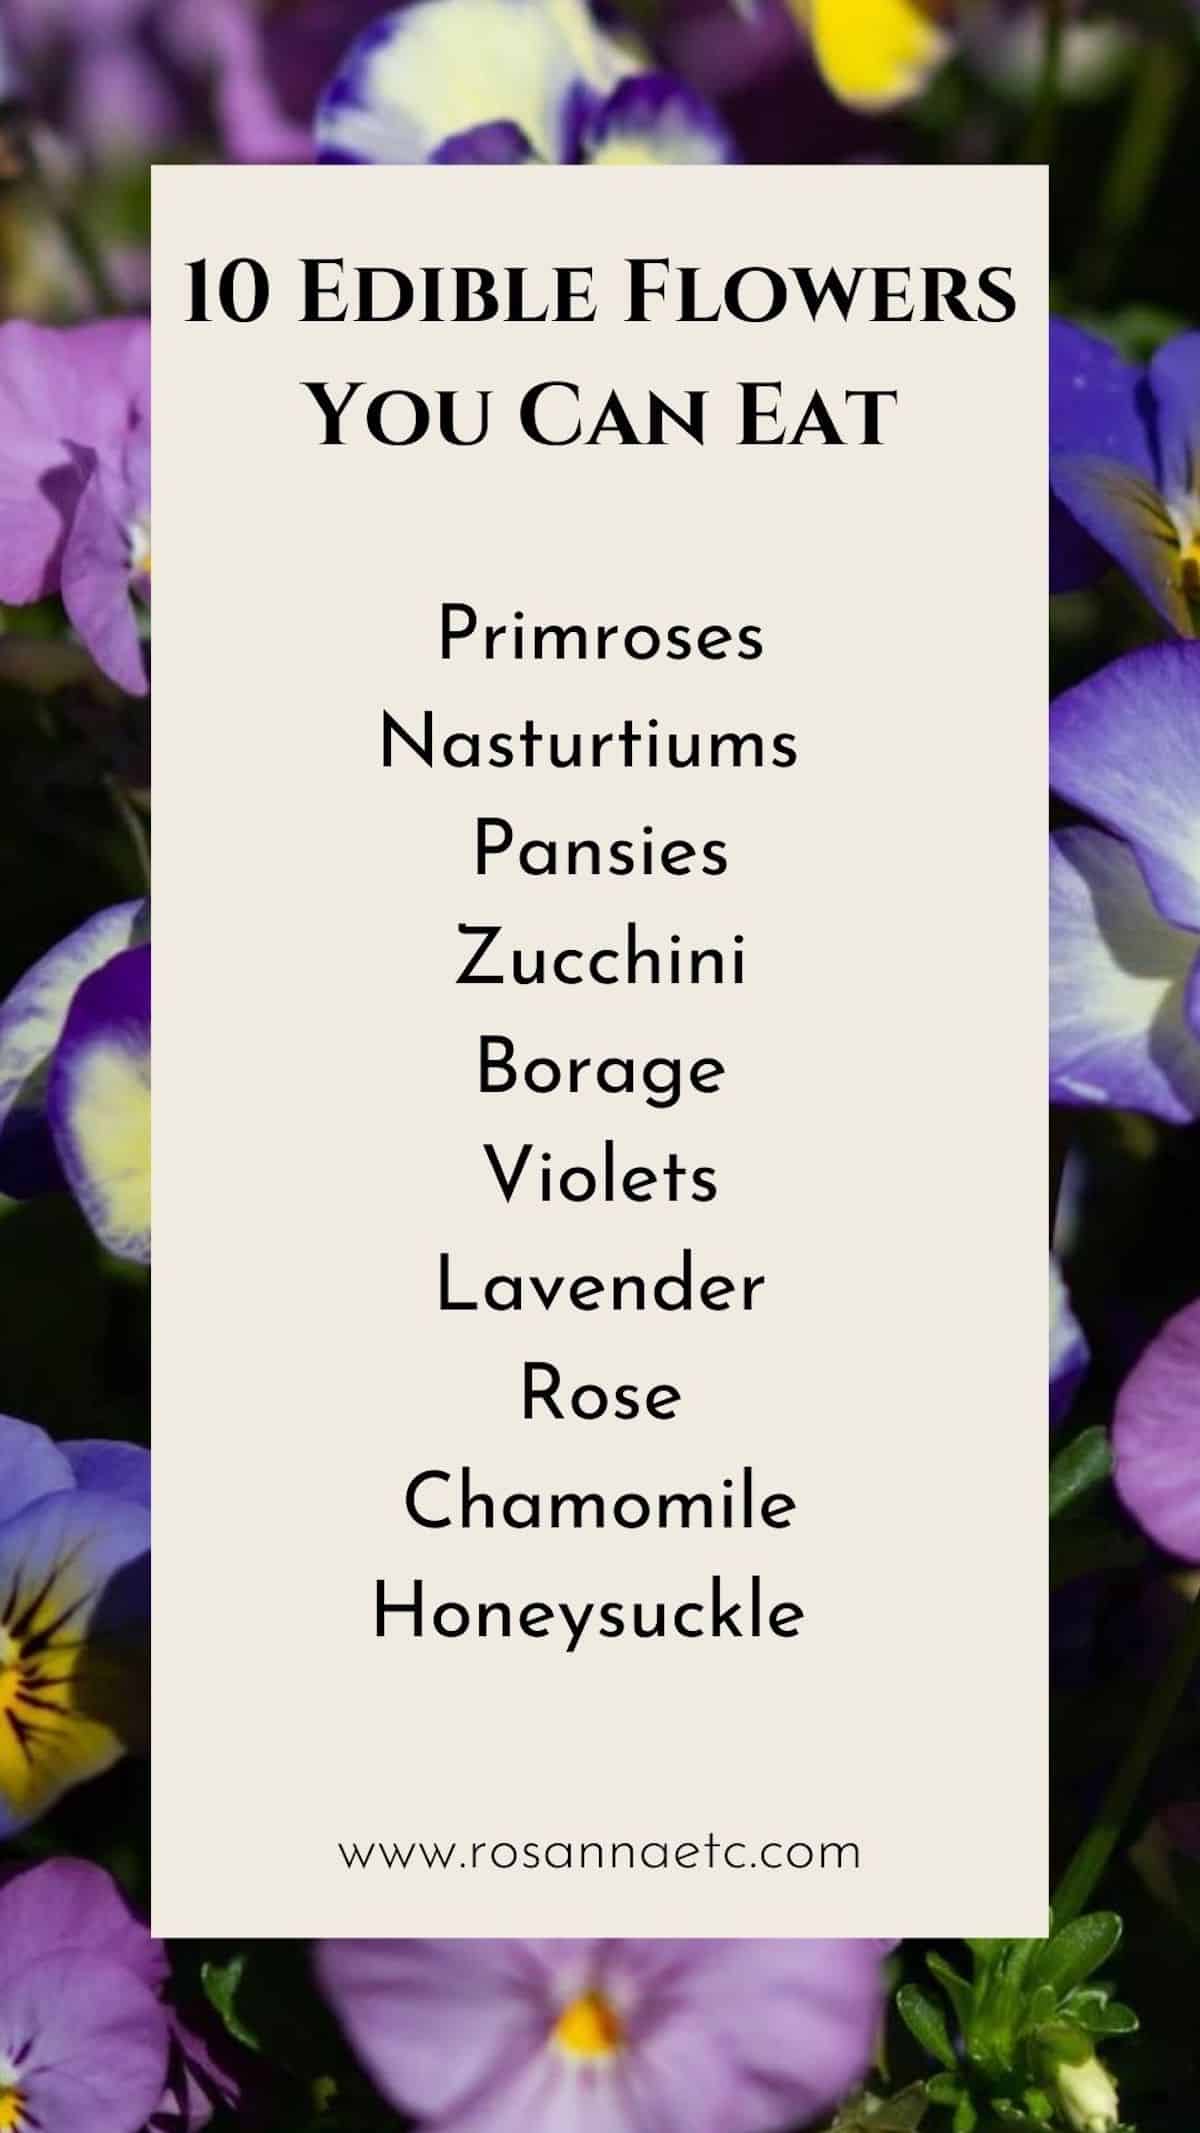 A photo of pansies with overlaid text listing 10 types of edible flowers: Primroses, nasturtiums, pansies, zucchini, borage, violets, lavender, rose and chamomile. 